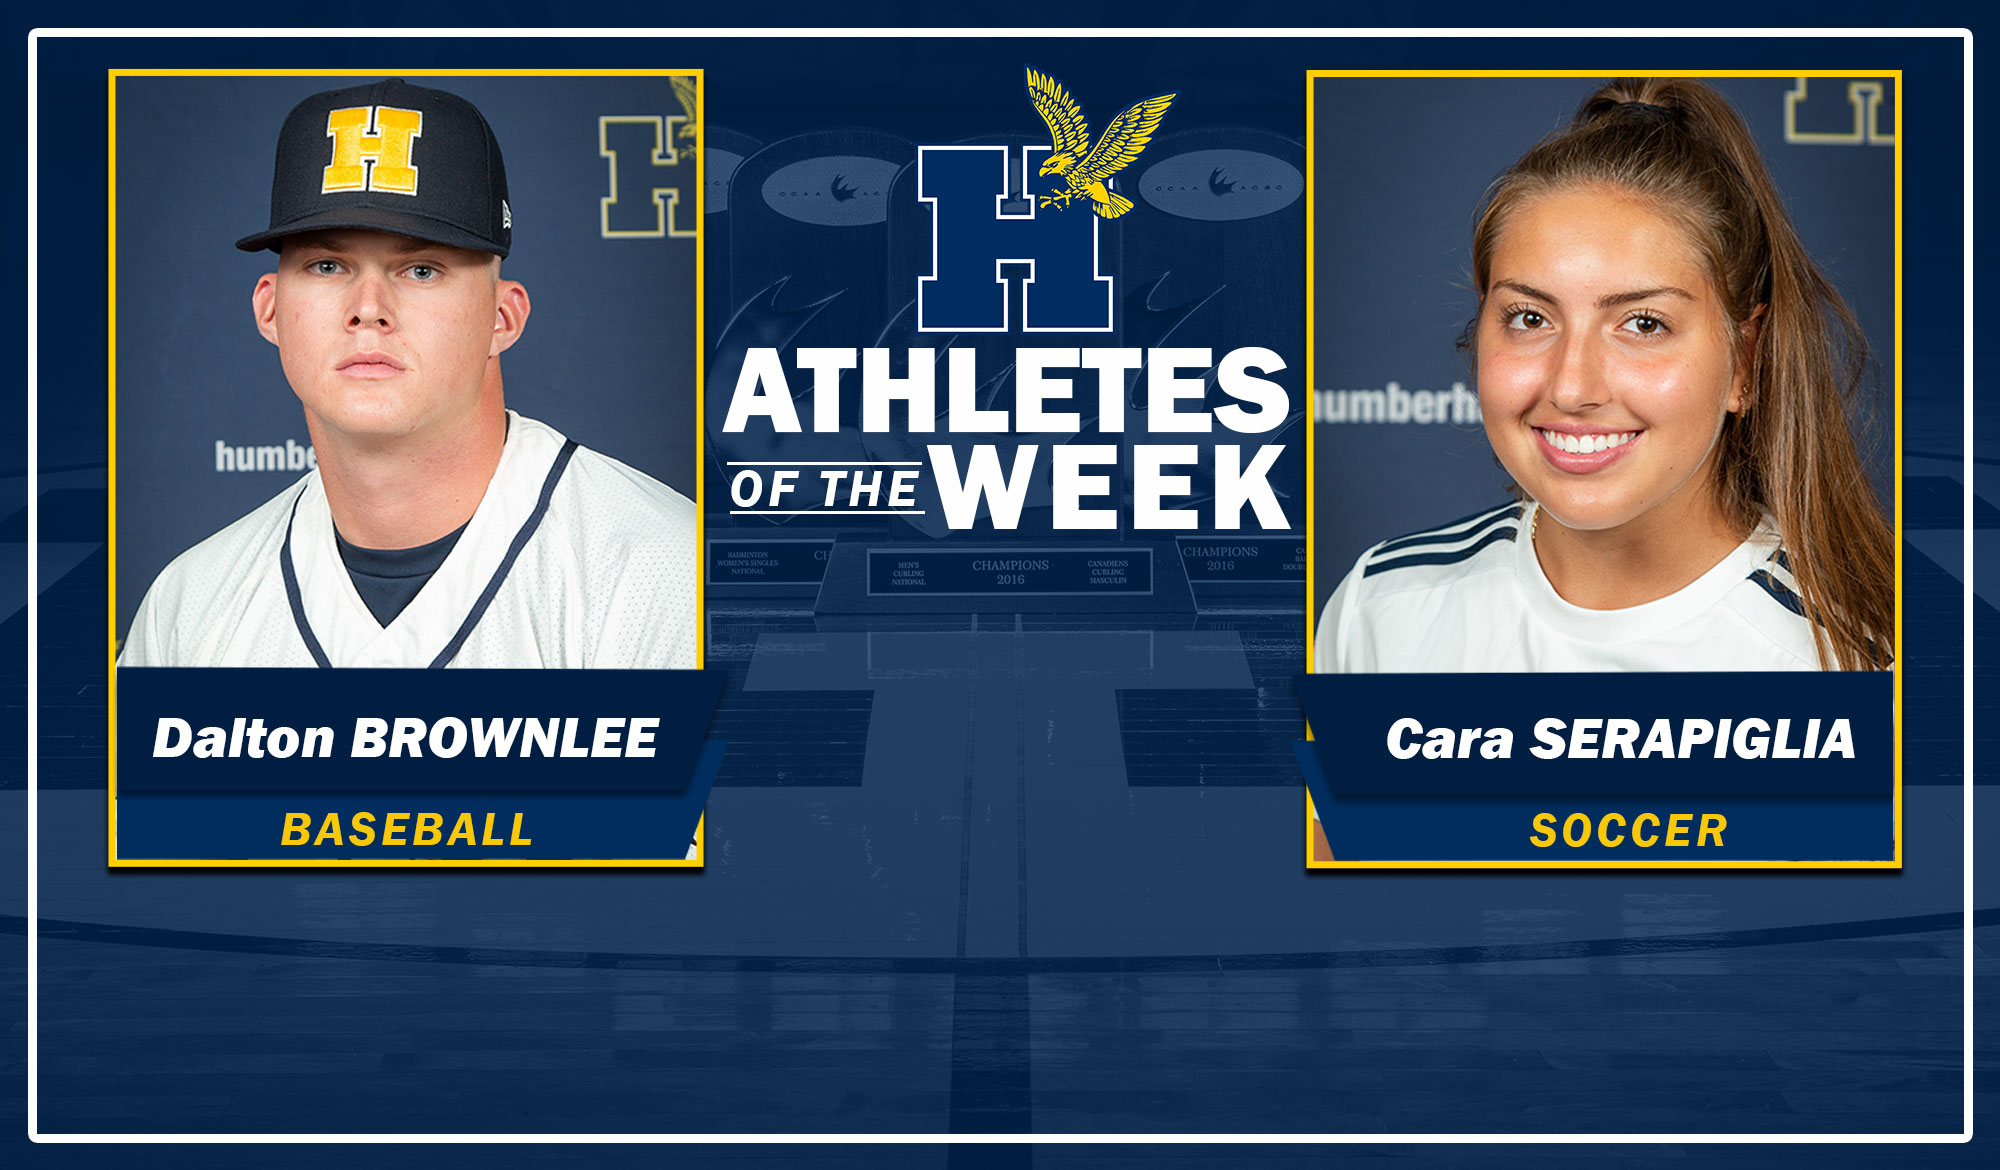 Brownlee and Serapiglia headshots for athletes of the week